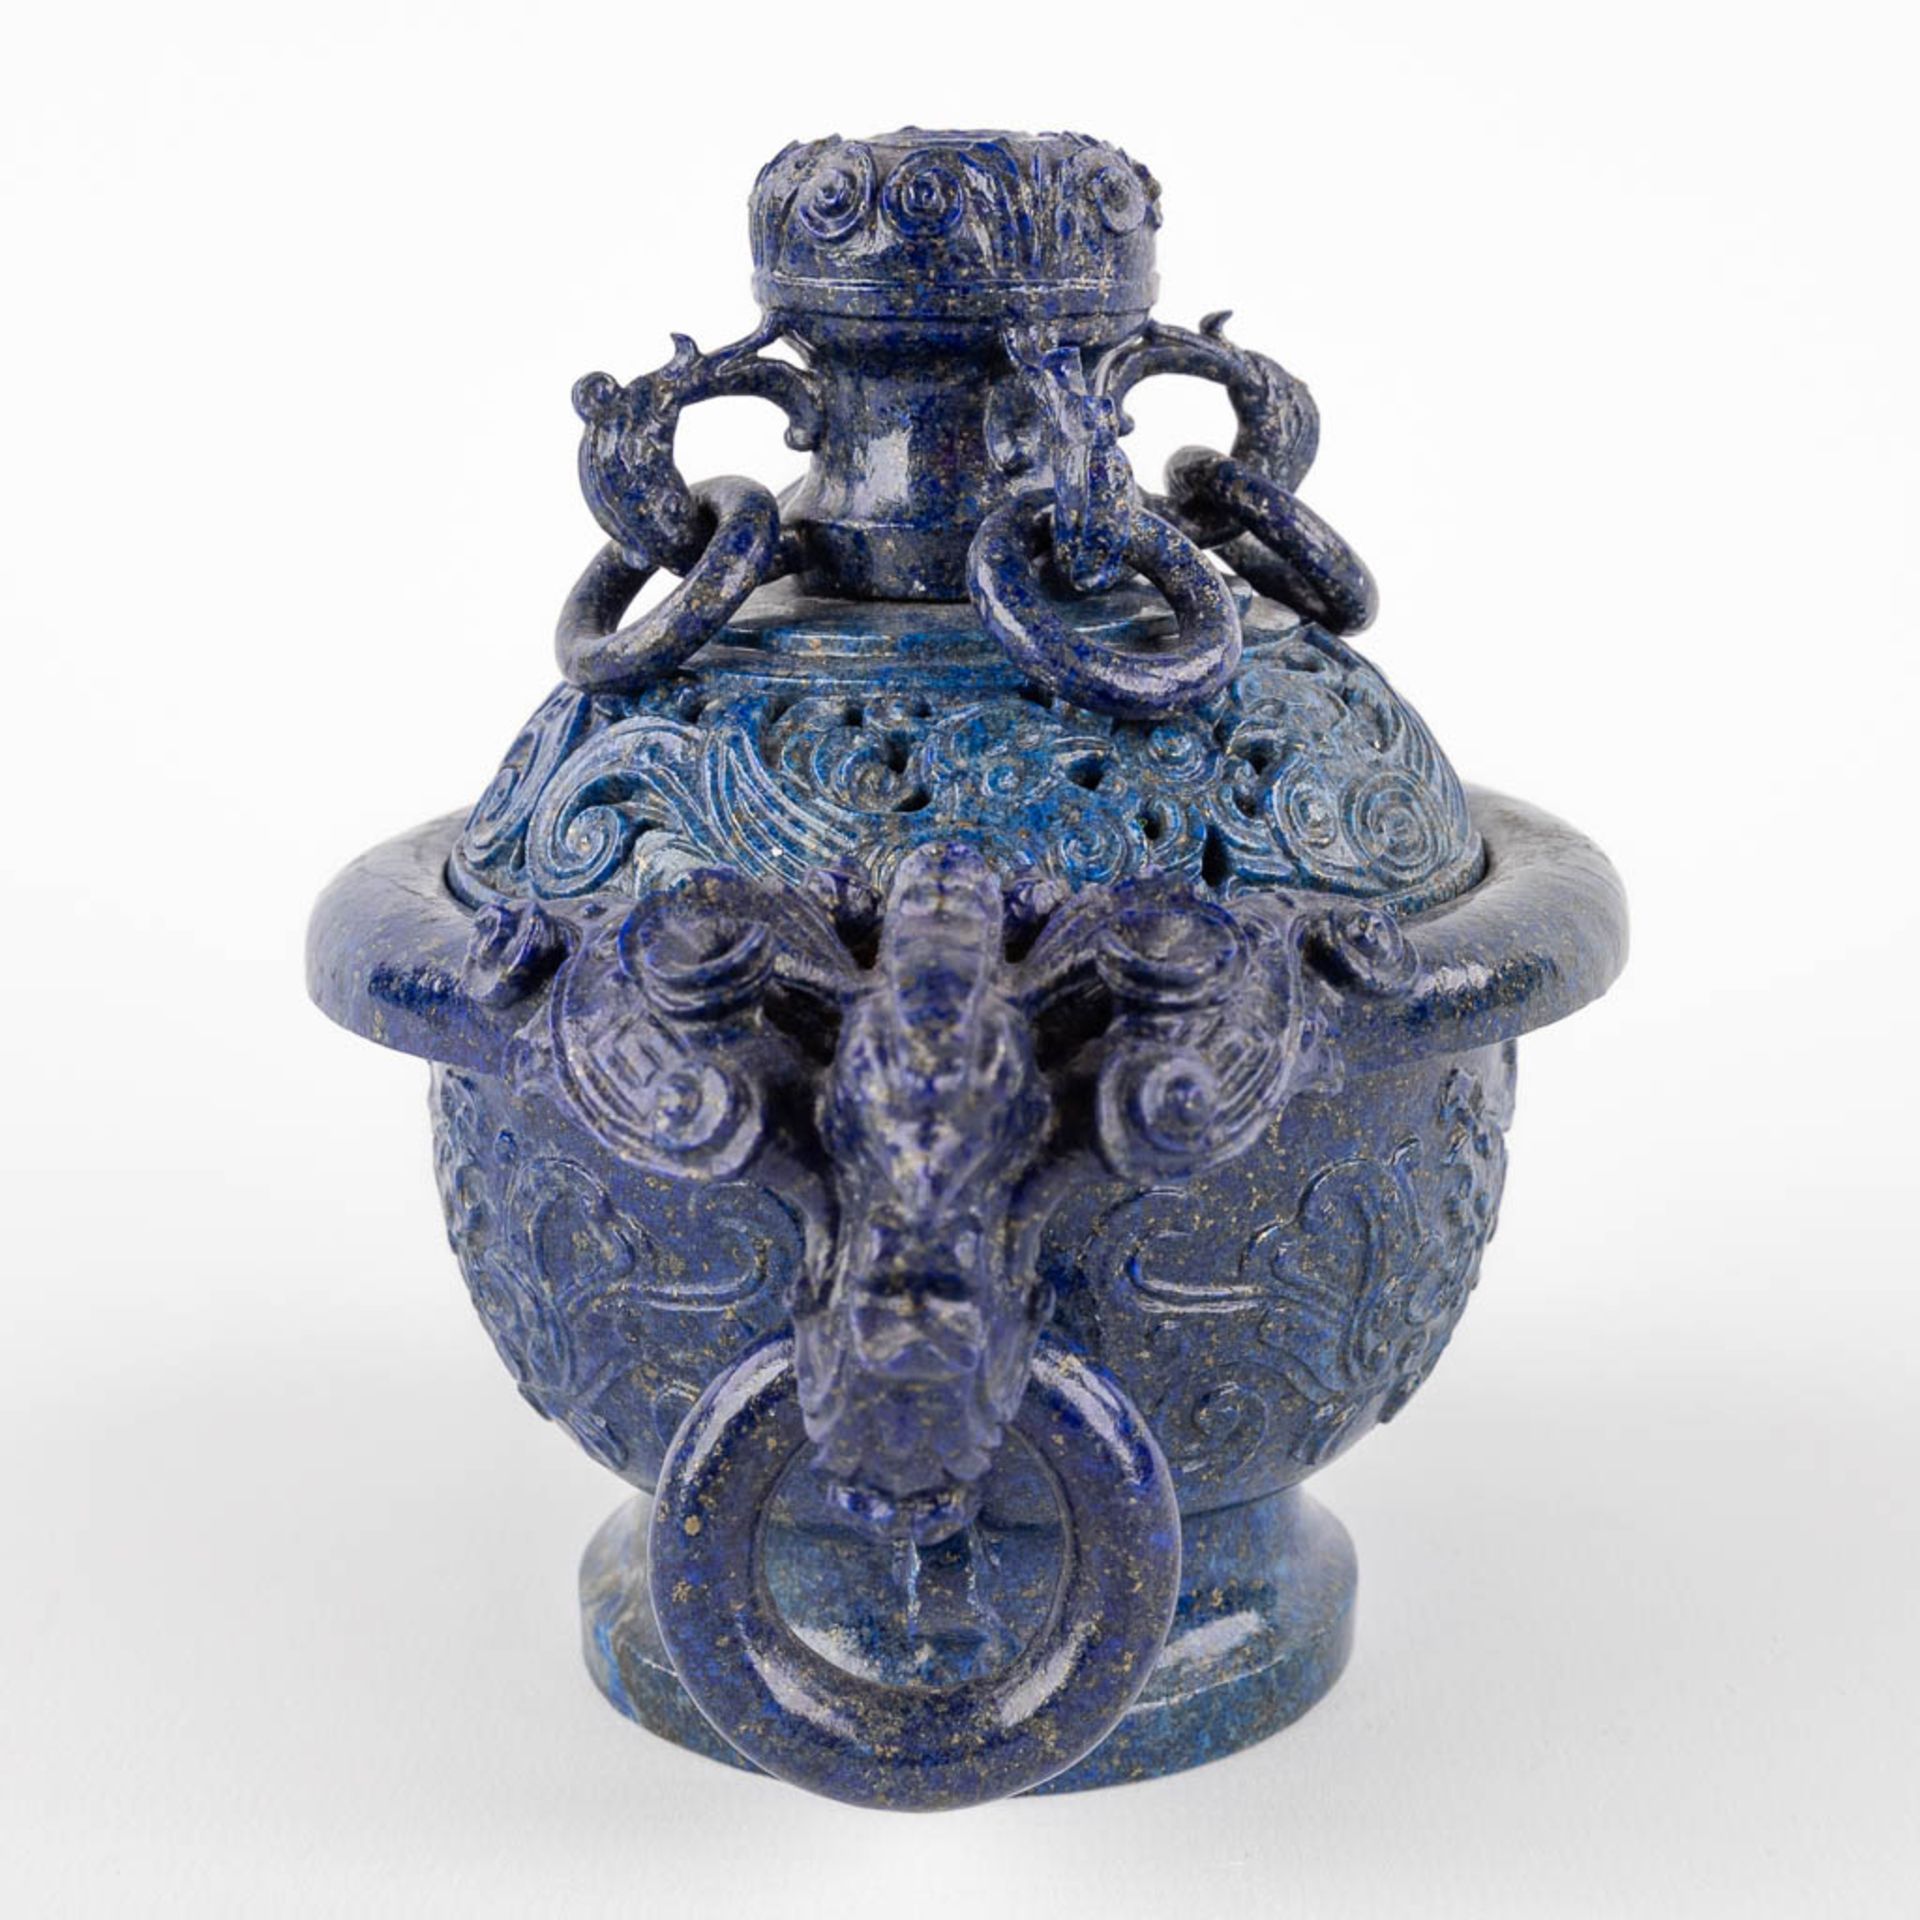 A Chinese censer, sculptured Lapis Lazuli, decorated with birds and flowers. (D:11 x W:17 x H:14 cm) - Image 6 of 11